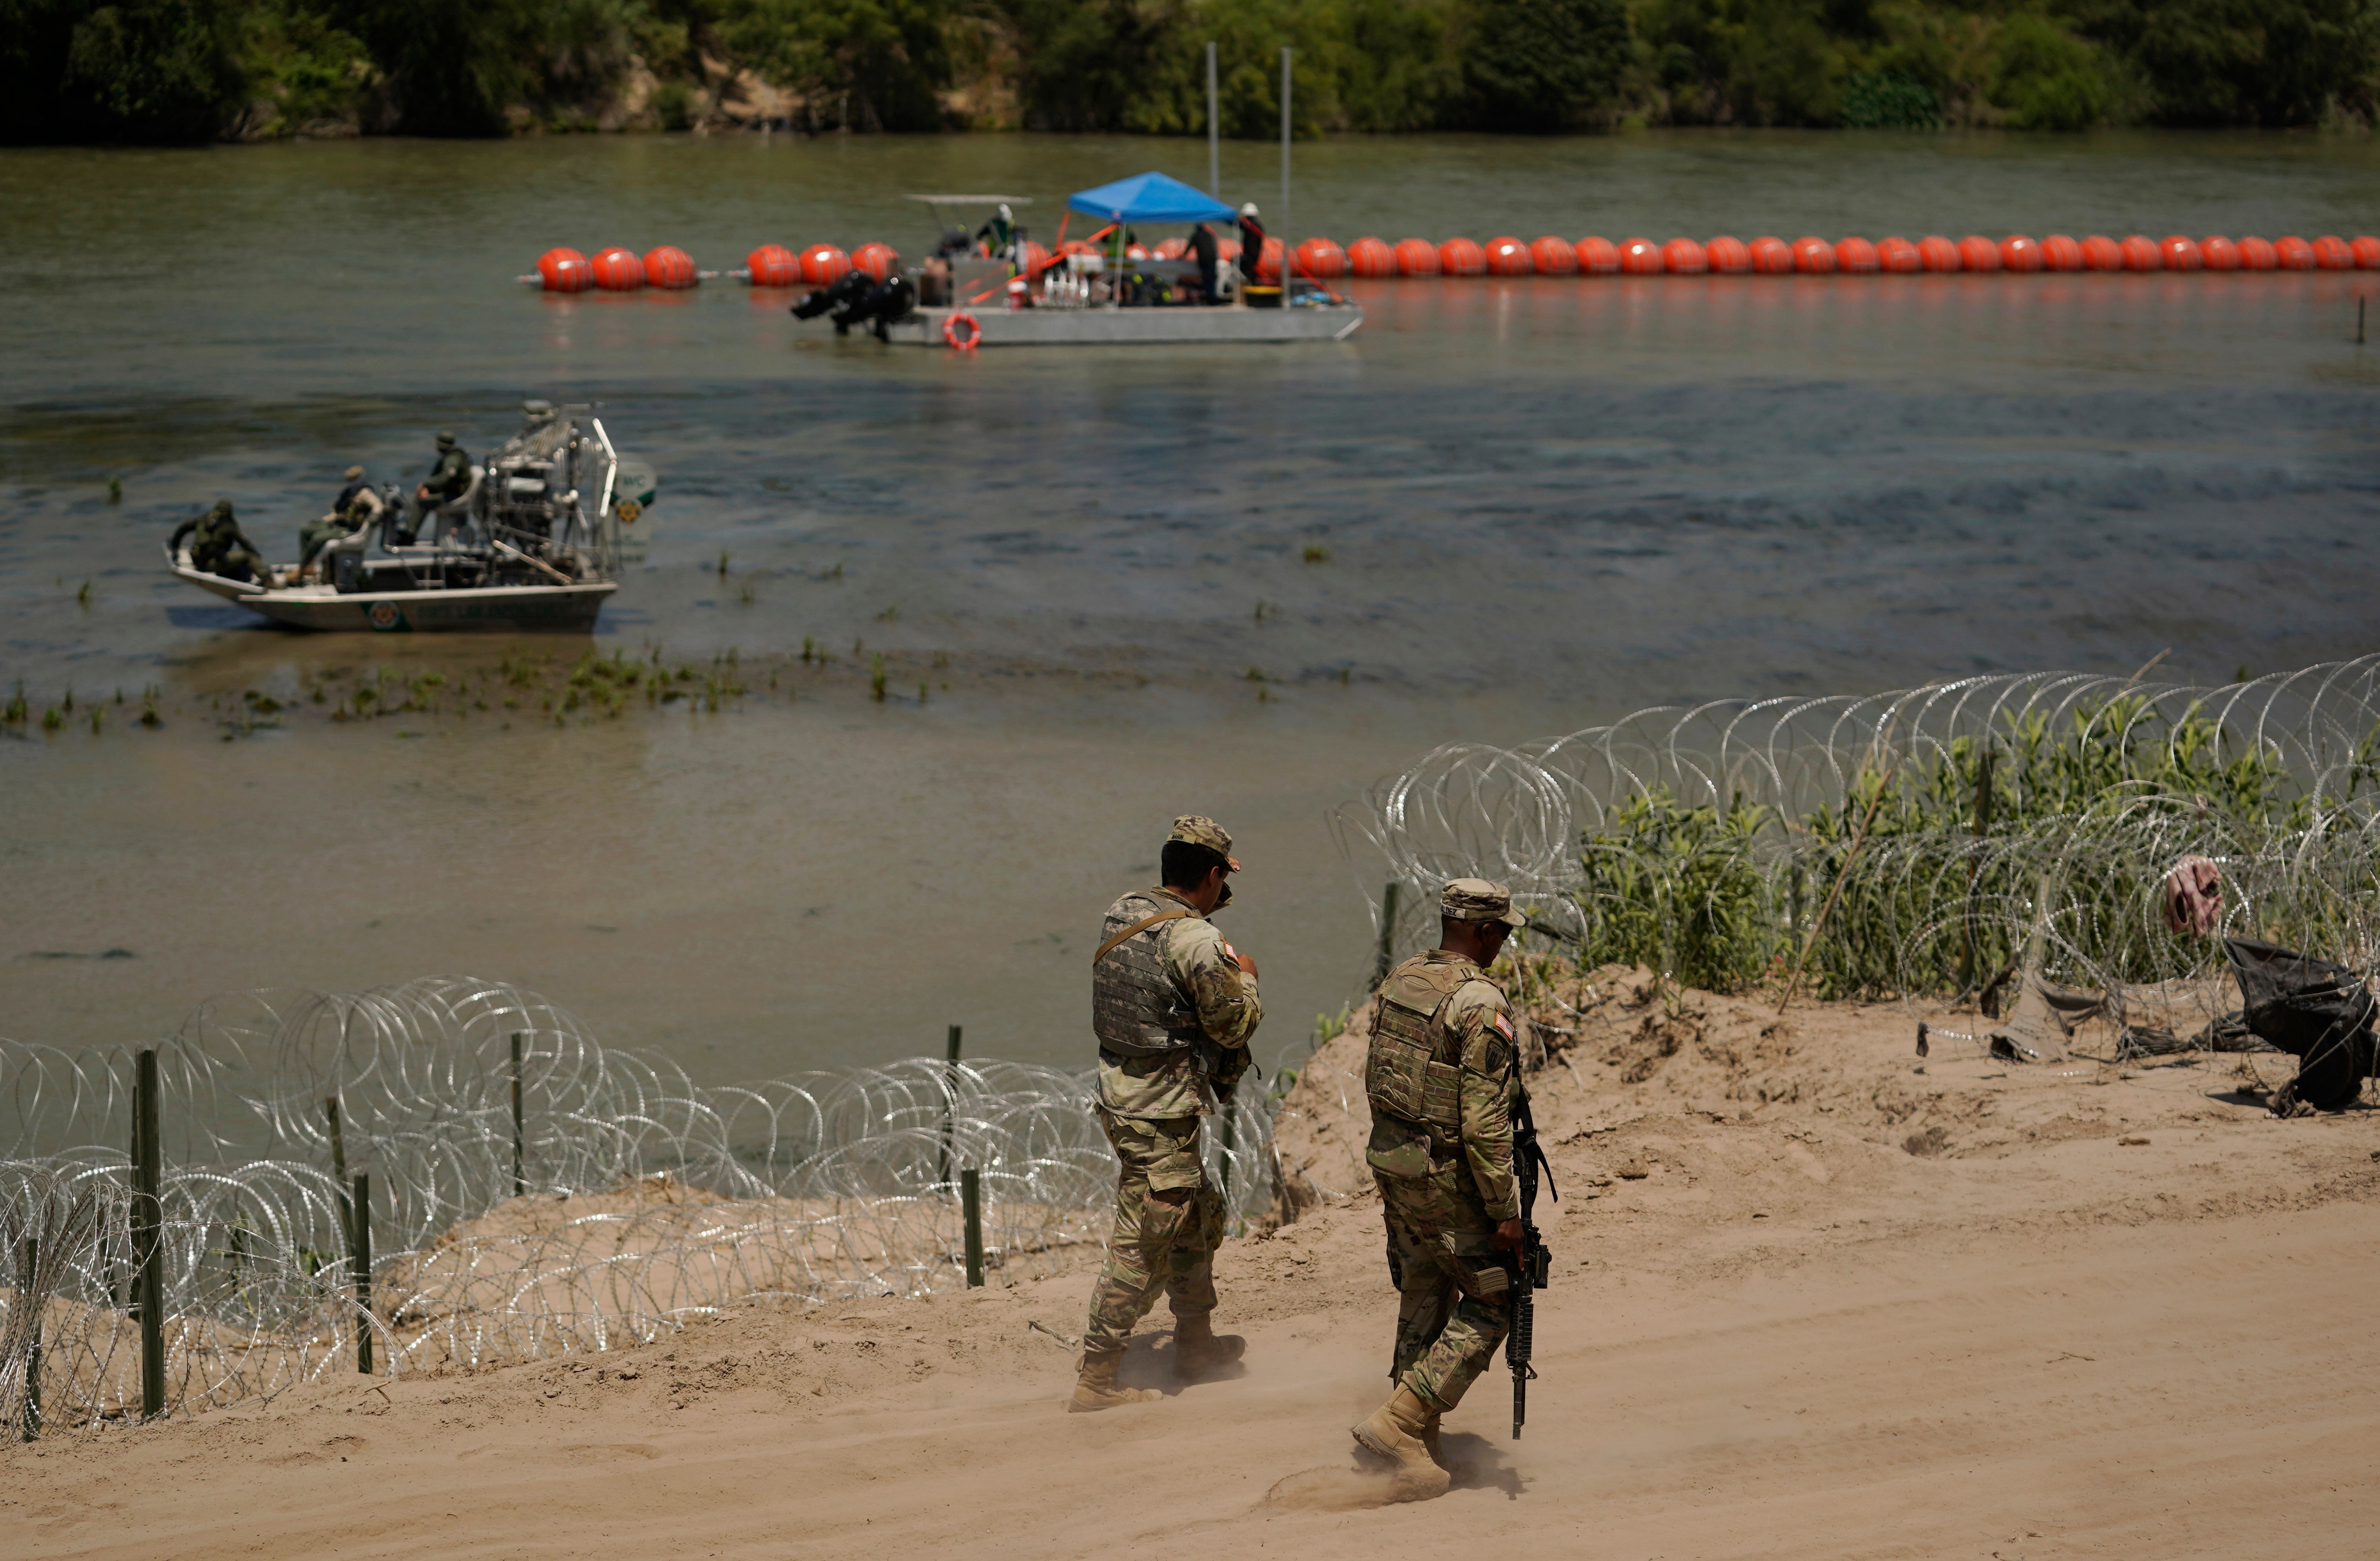 Guardsmen patrol as workers continue to deploy large buoys to be used as a border barrier along the banks of the Rio Grande in Eagle Pass, Texas, Wednesday, July 12, 2023